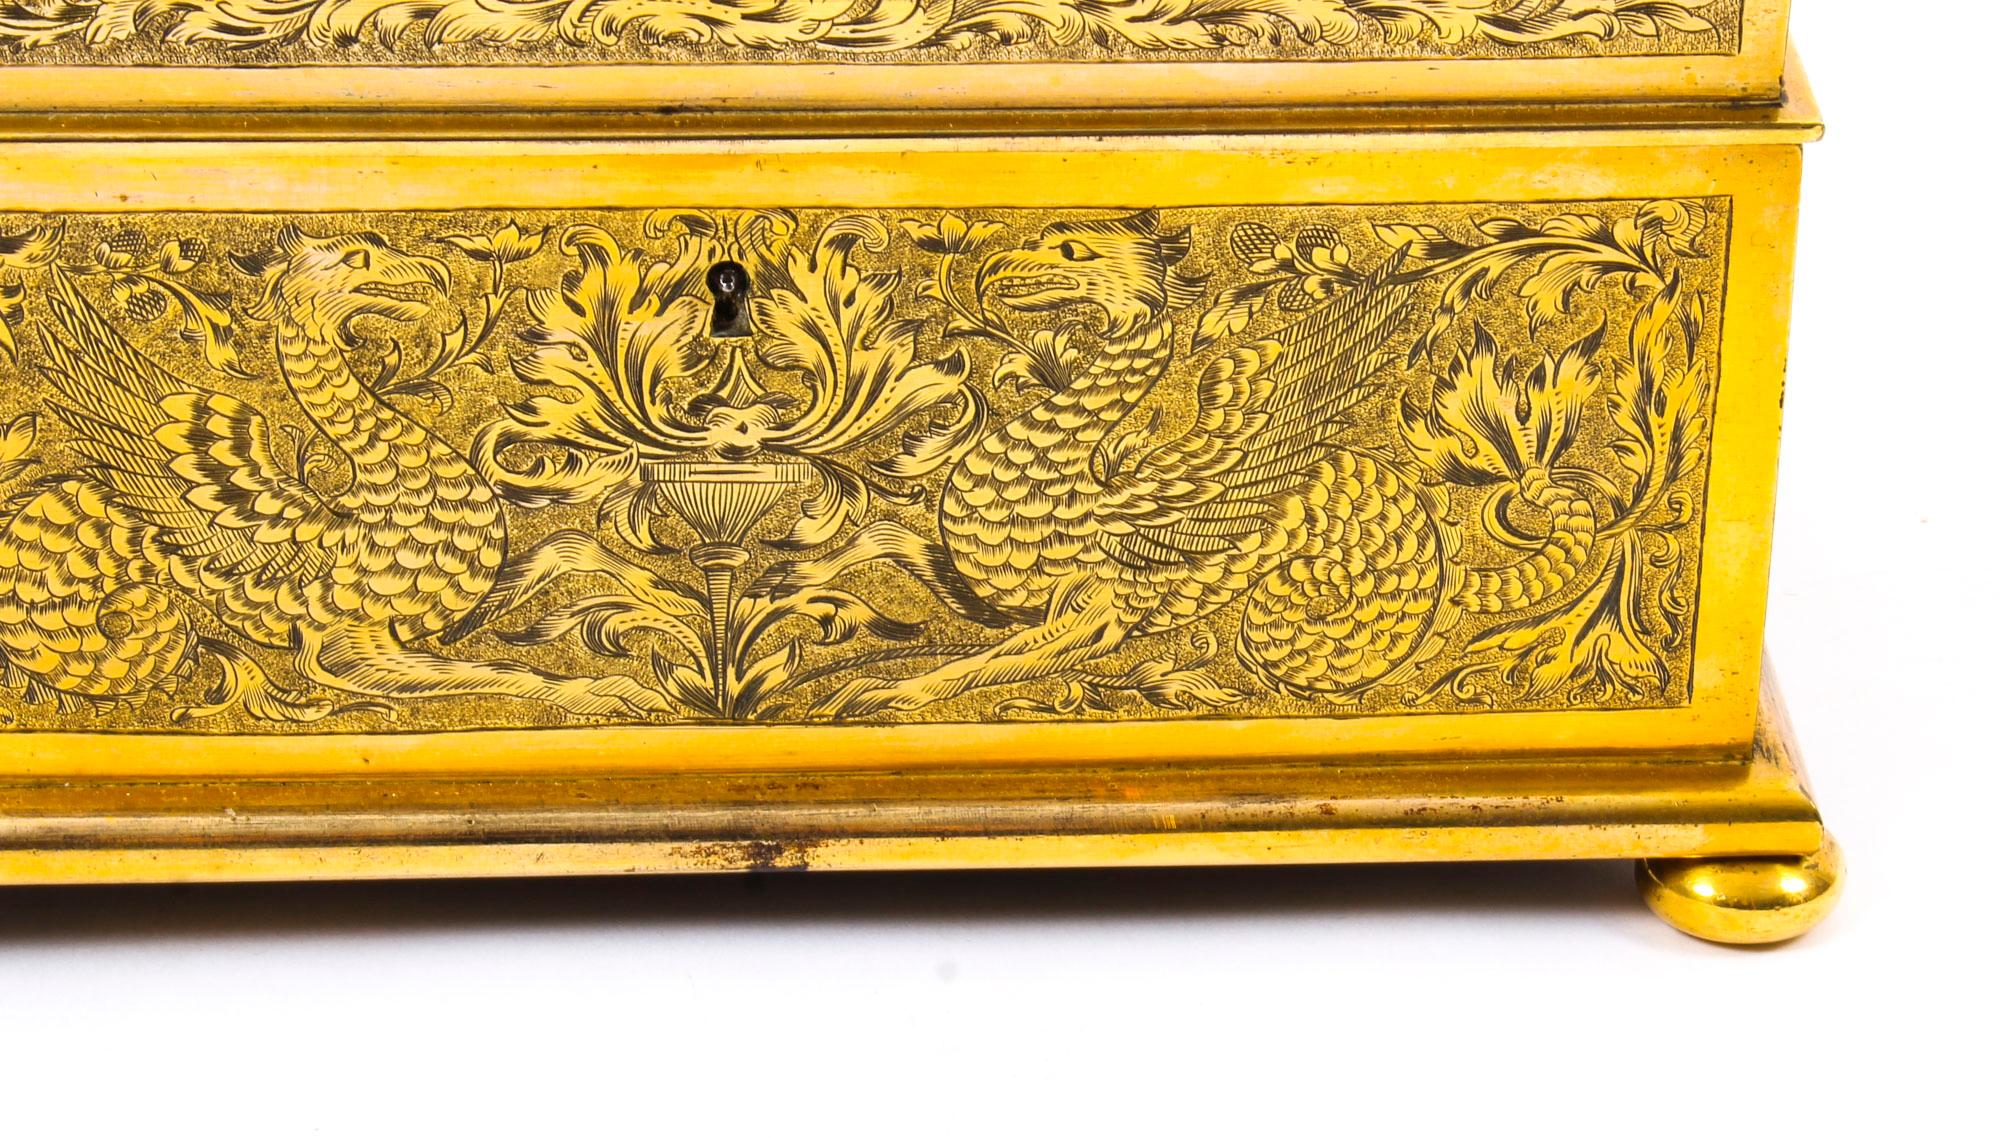 Porcelain Ormolu Sevres Jewel Casket Exhibited at the Great Exhibition 1851, 19th Century